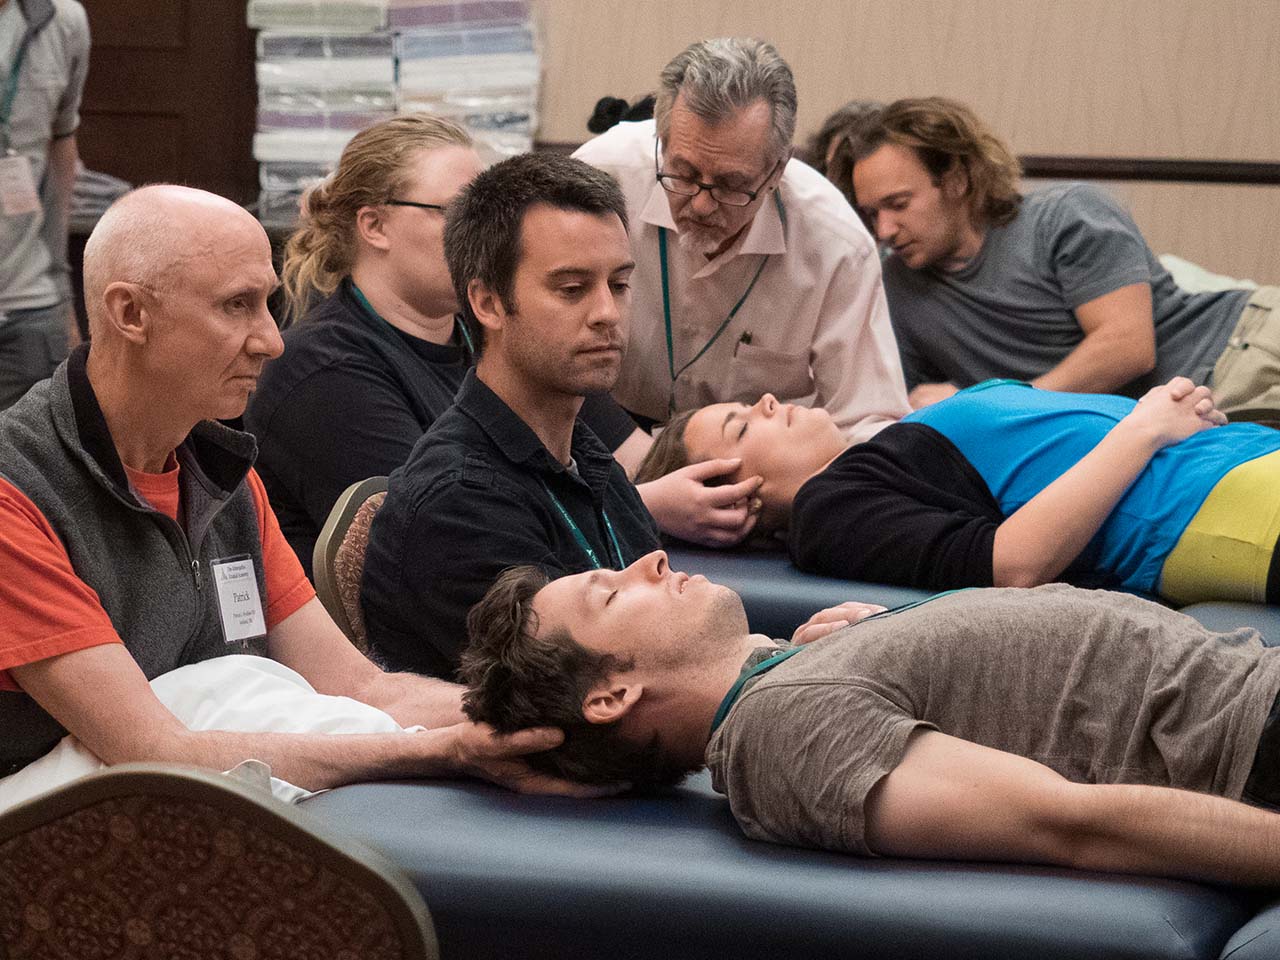 People lay on treatment tables while others hold their heads with both hands